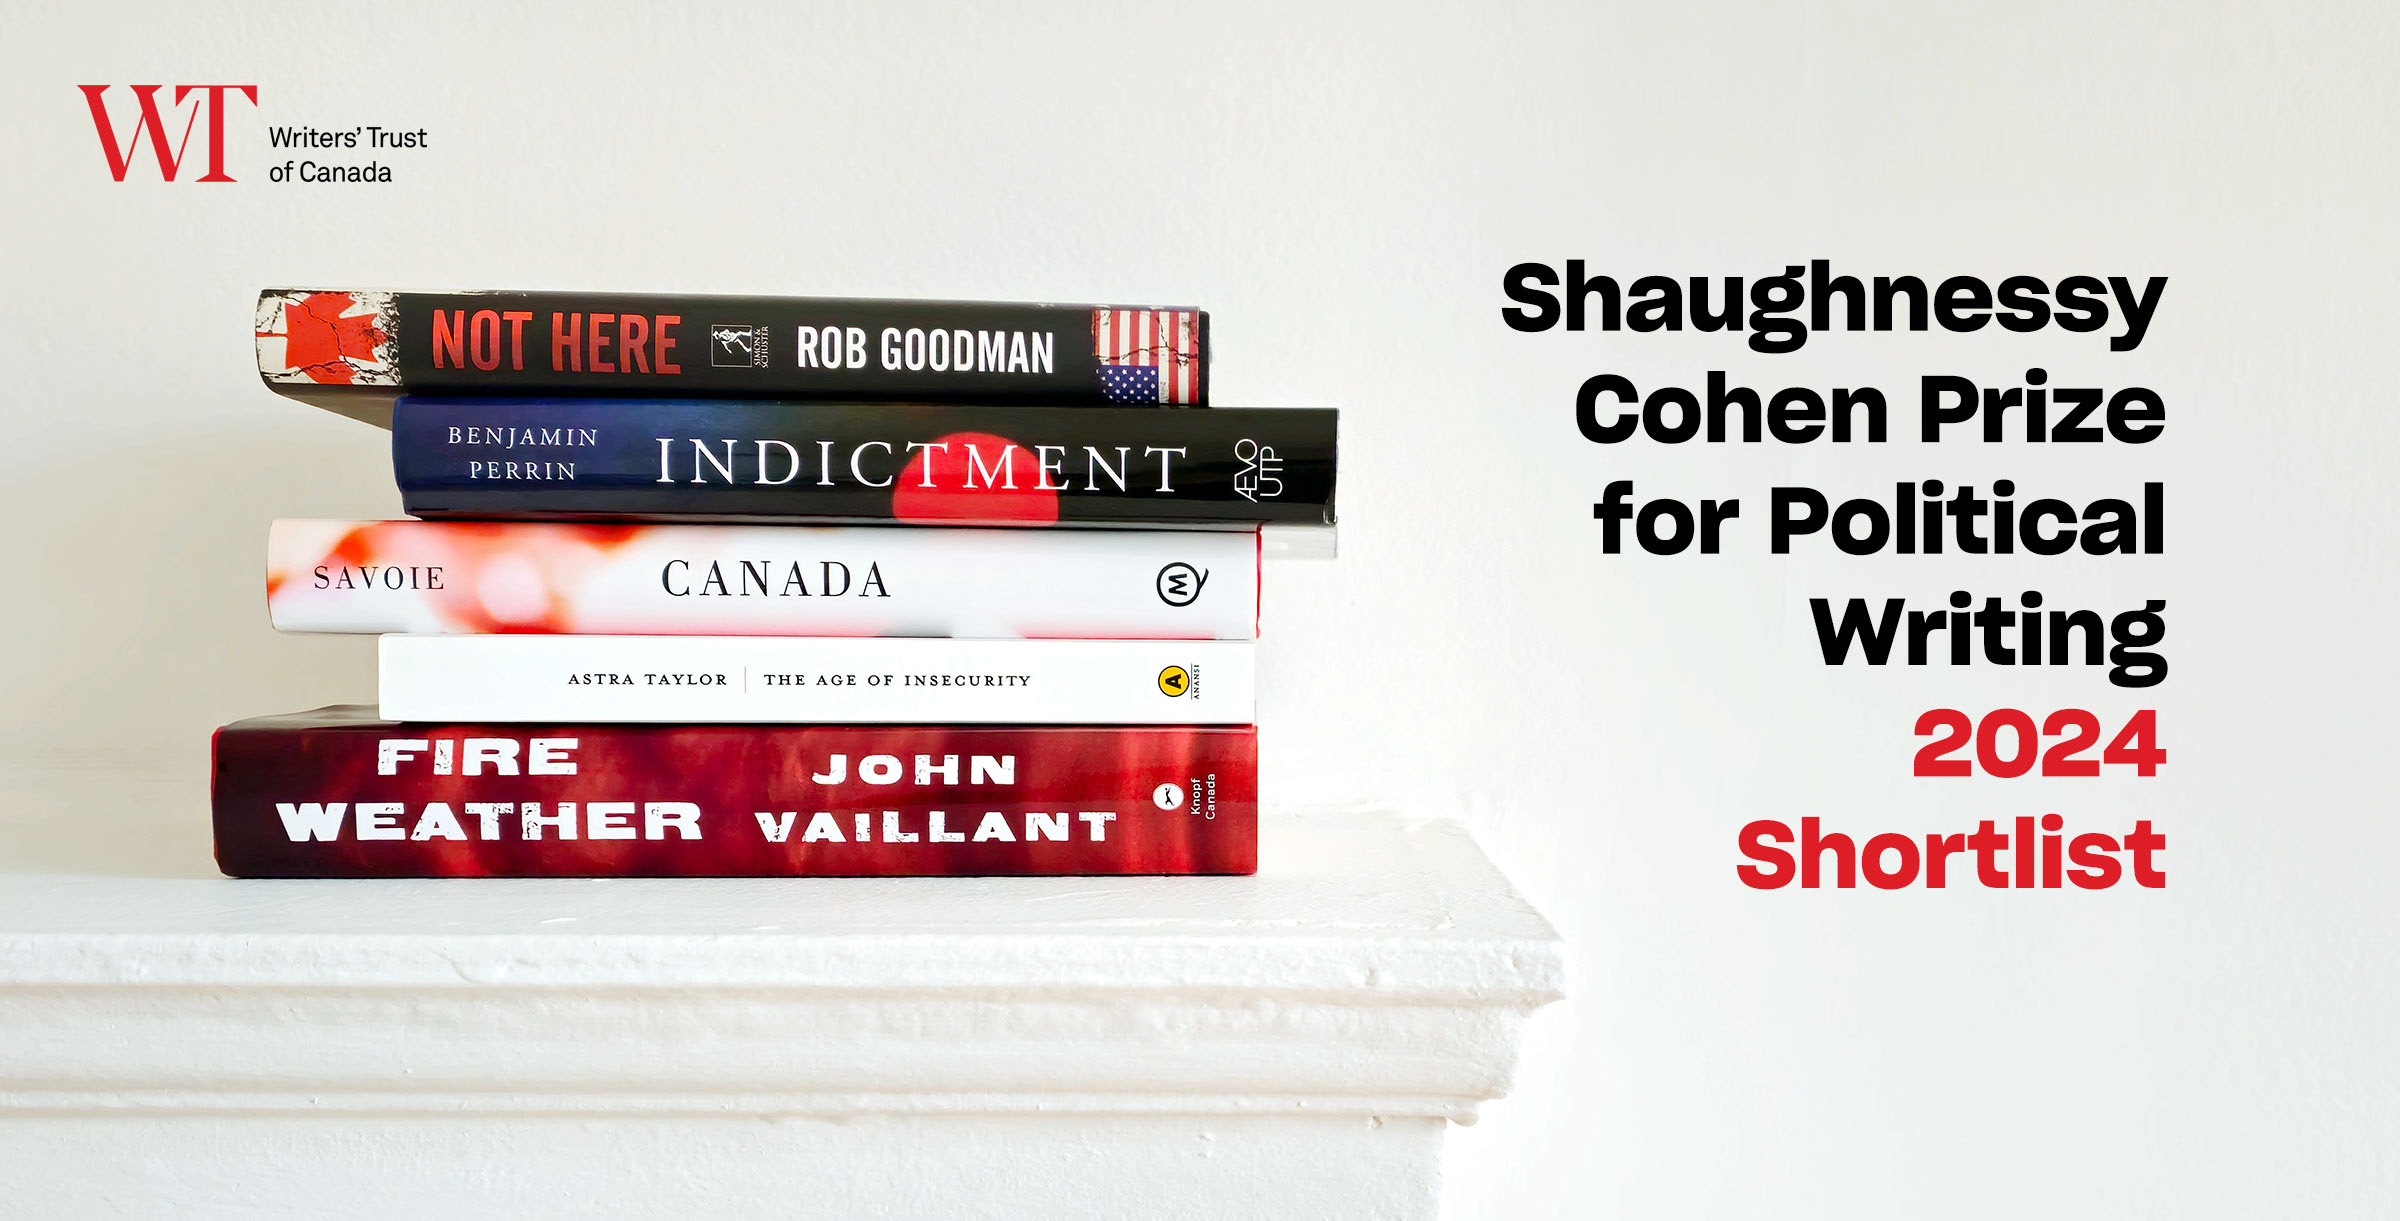 Shaughnessy Cohen Prize for Political Writing 2024 Shortlist